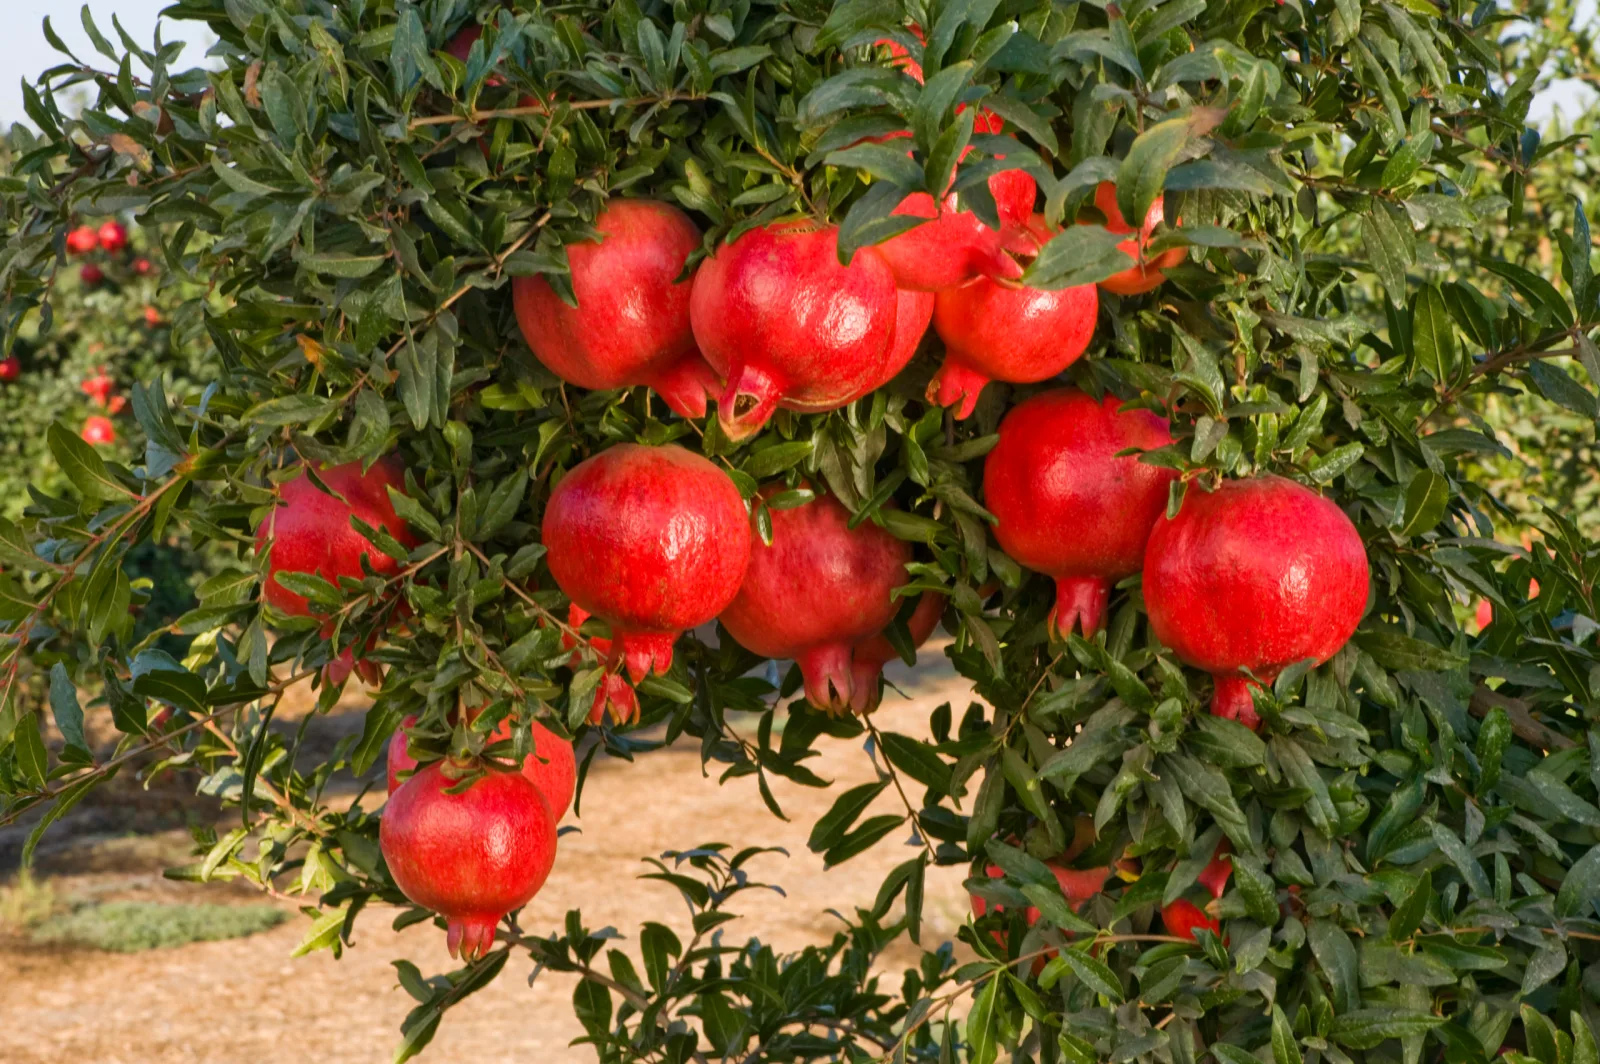 Guide to pomegranate farming that new farmers should follow